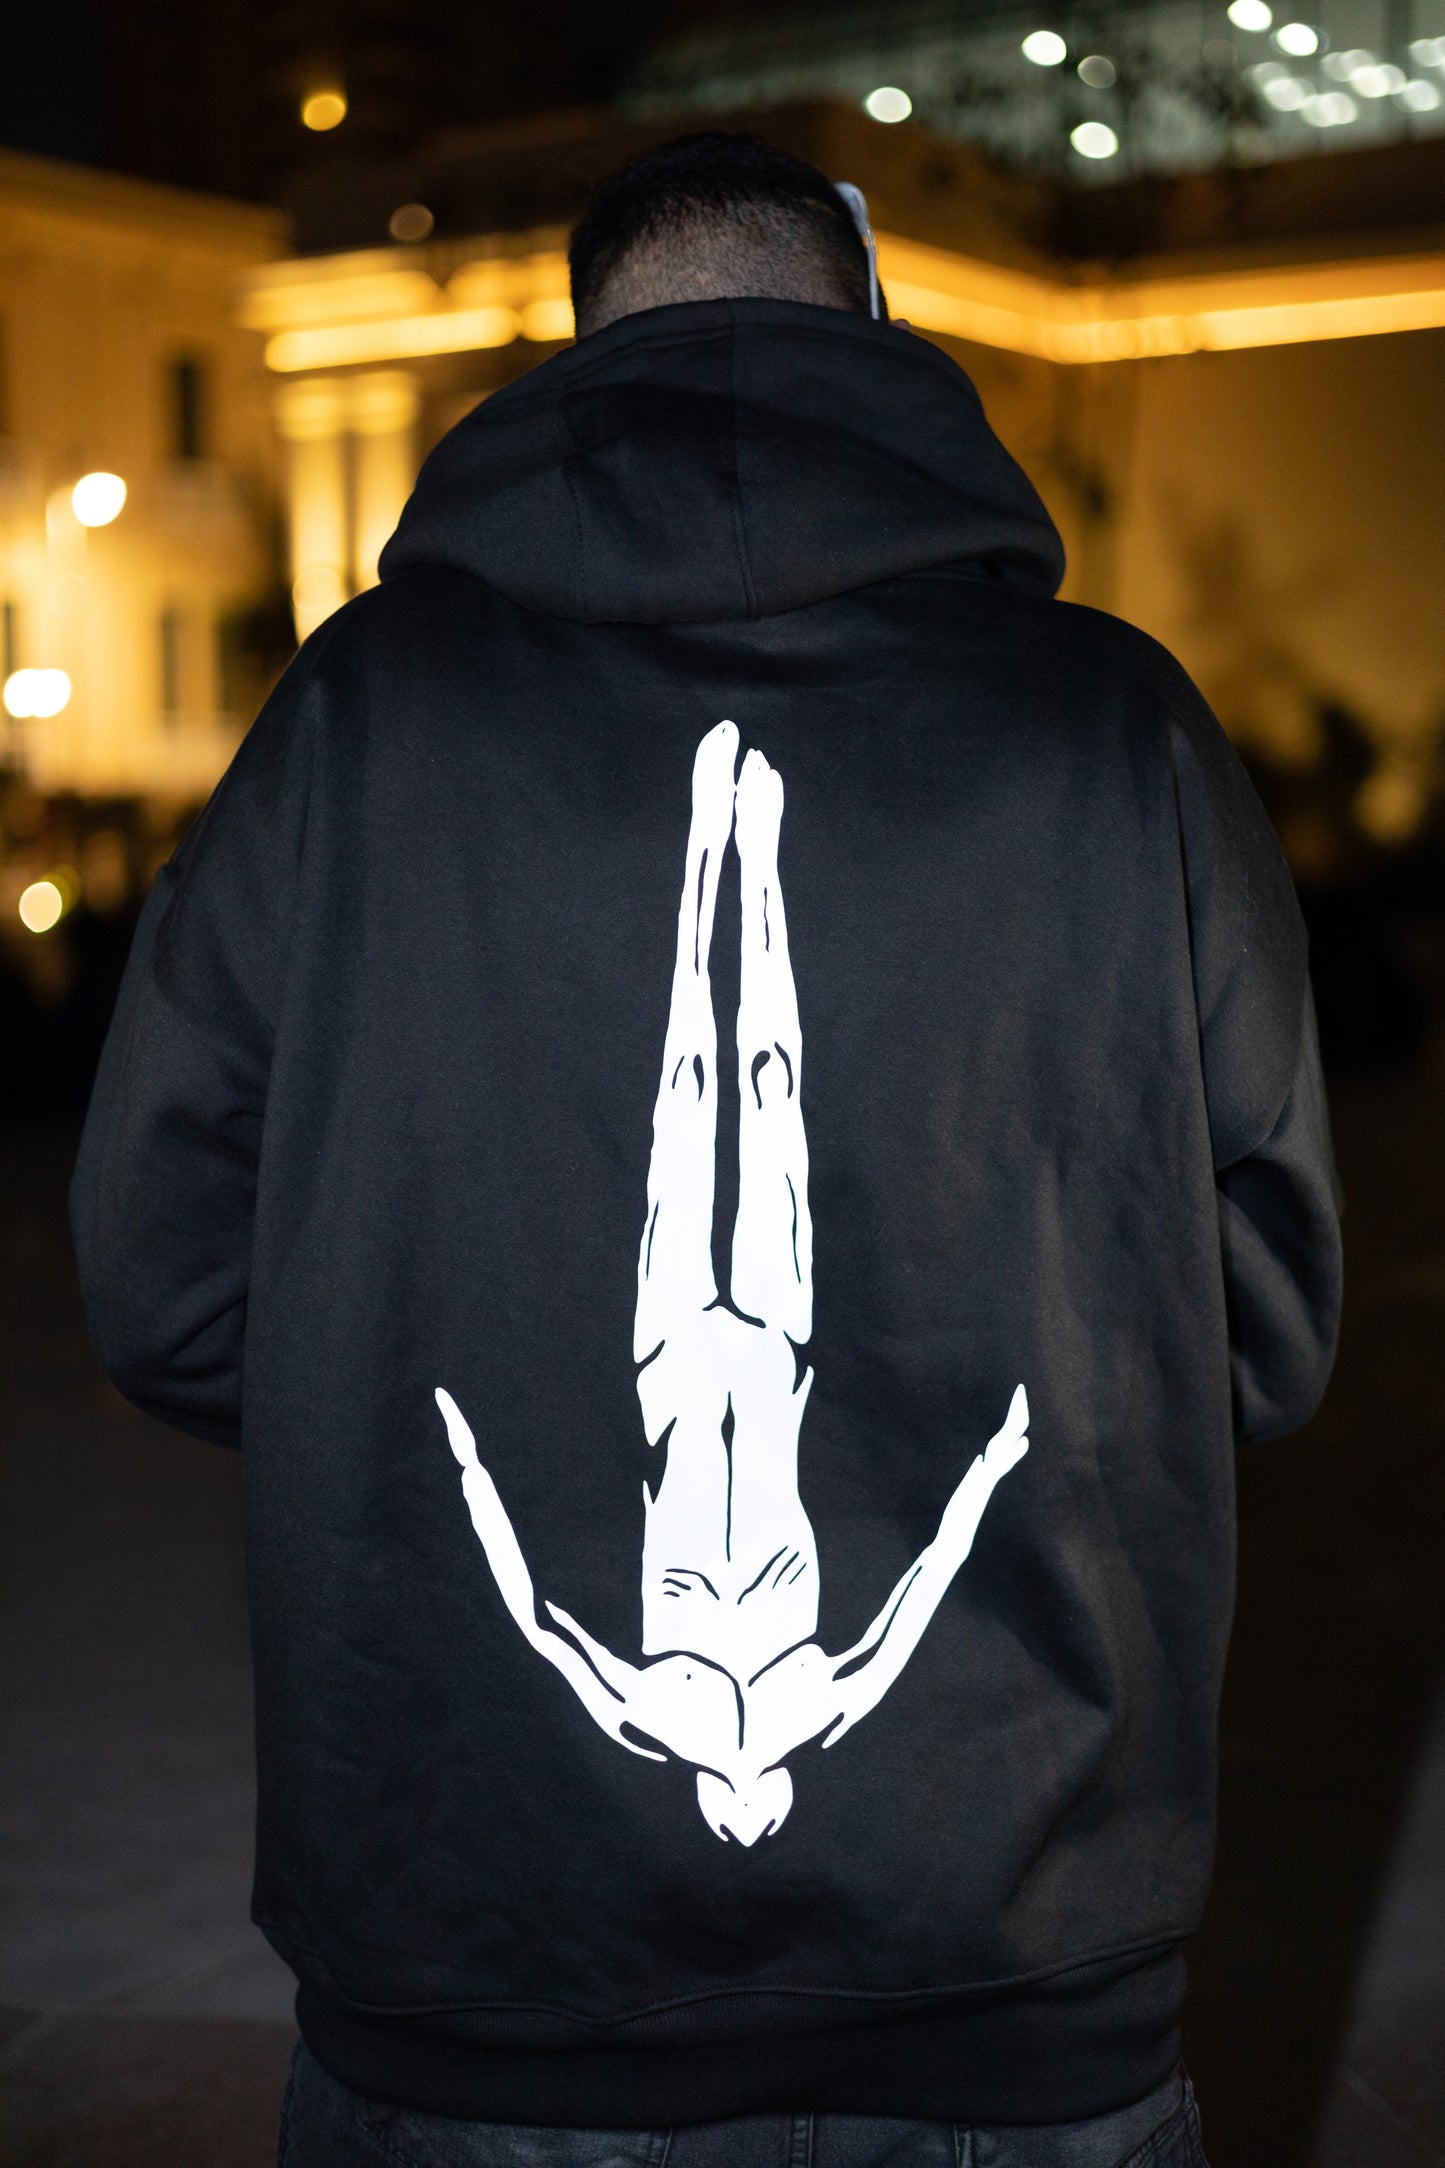 Edgy black oversized hoodie with glowing reflective "After Life" text and logo graphic when hit by light - made for making a scene at night festivals.